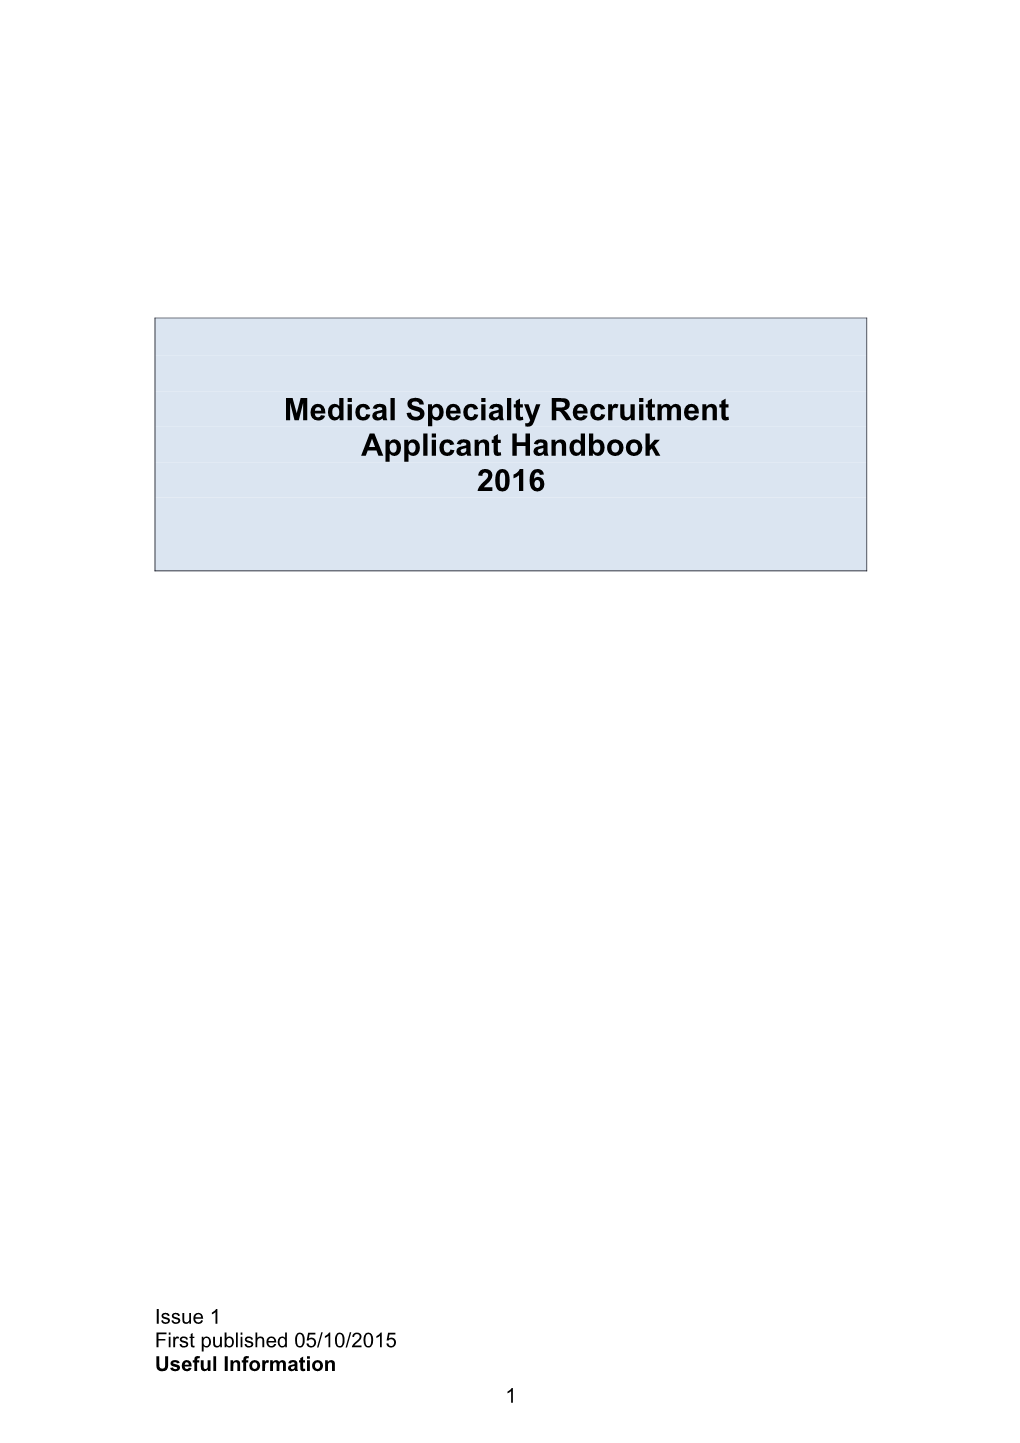 Medical Specialty Recruitment